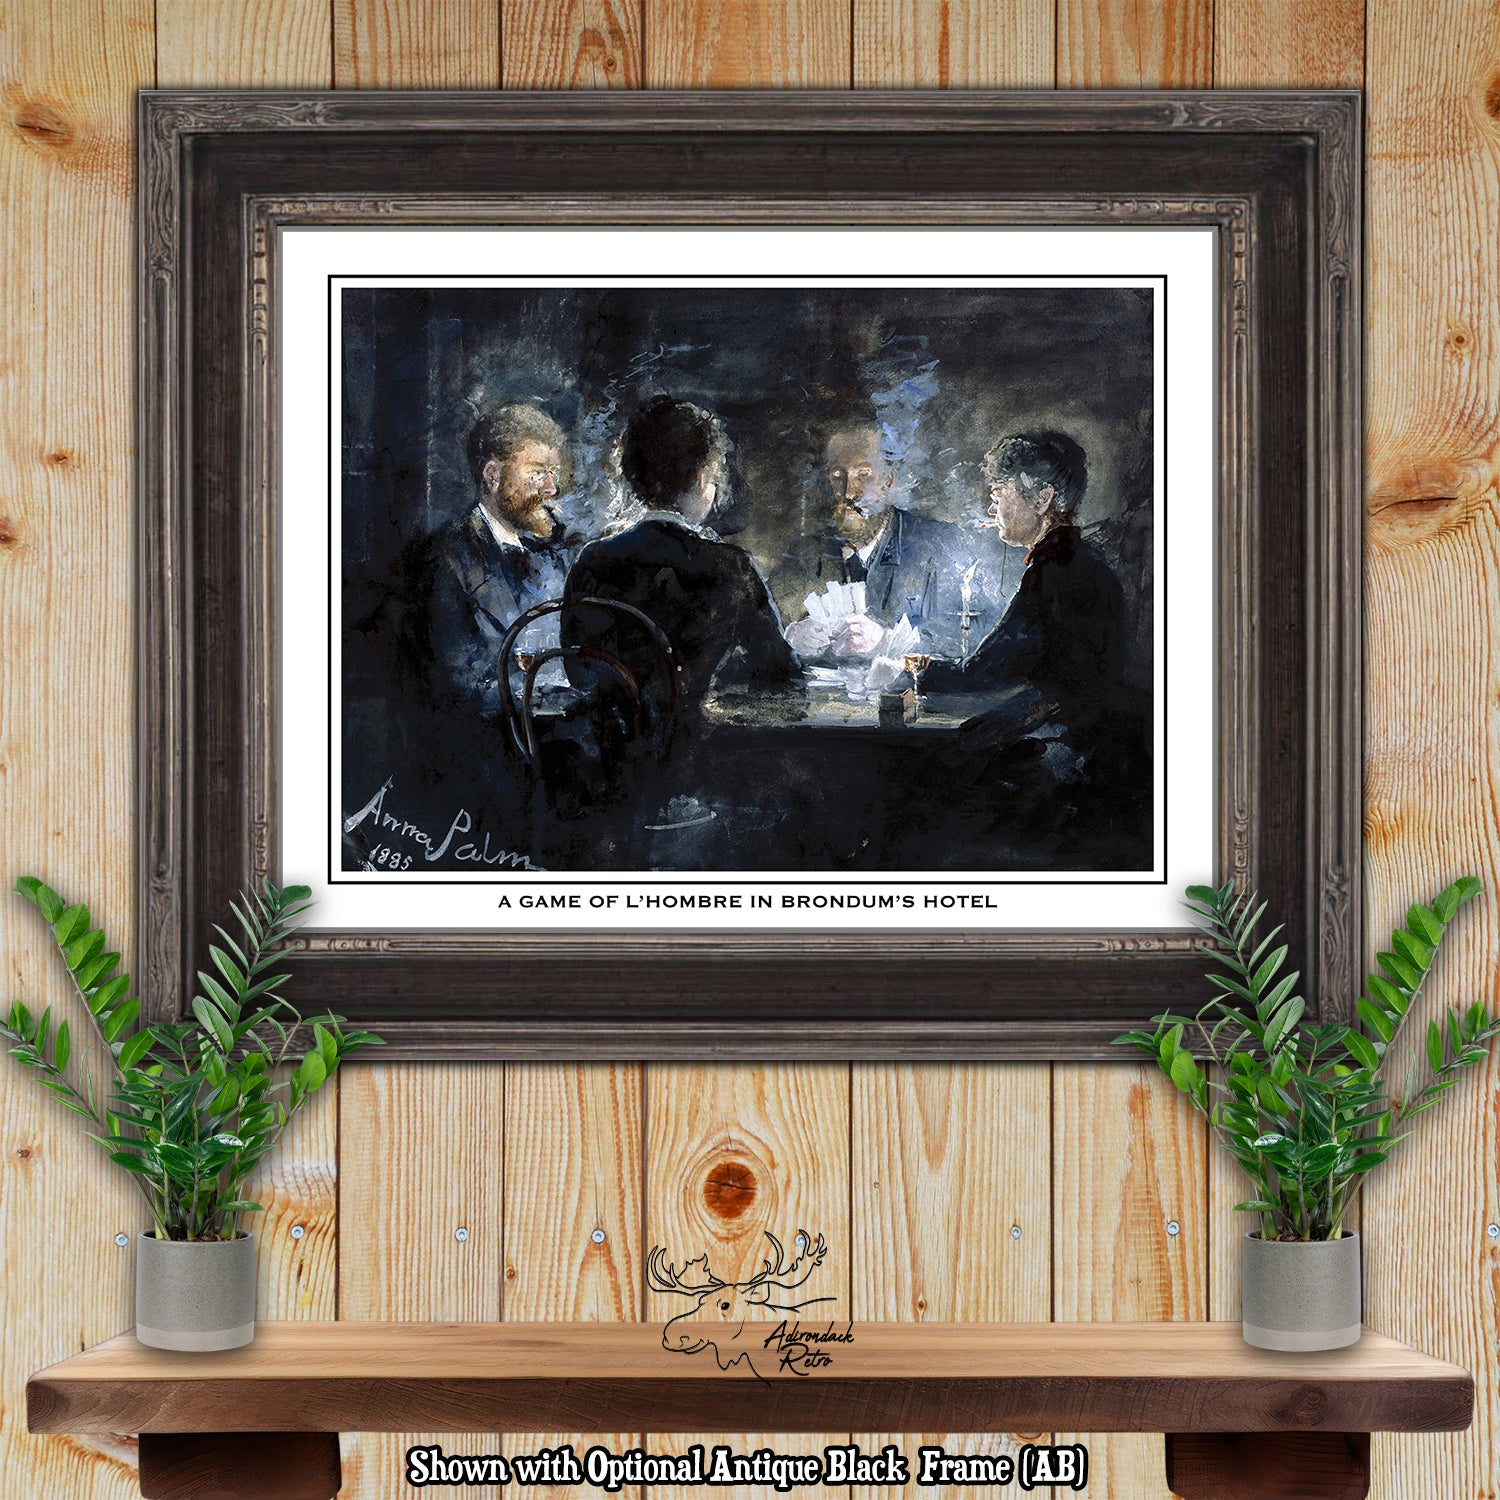 A Game of L'hombre in Brondum's Hotel by Anna Palm Giclee Fine Art Print at Adirondack Retro